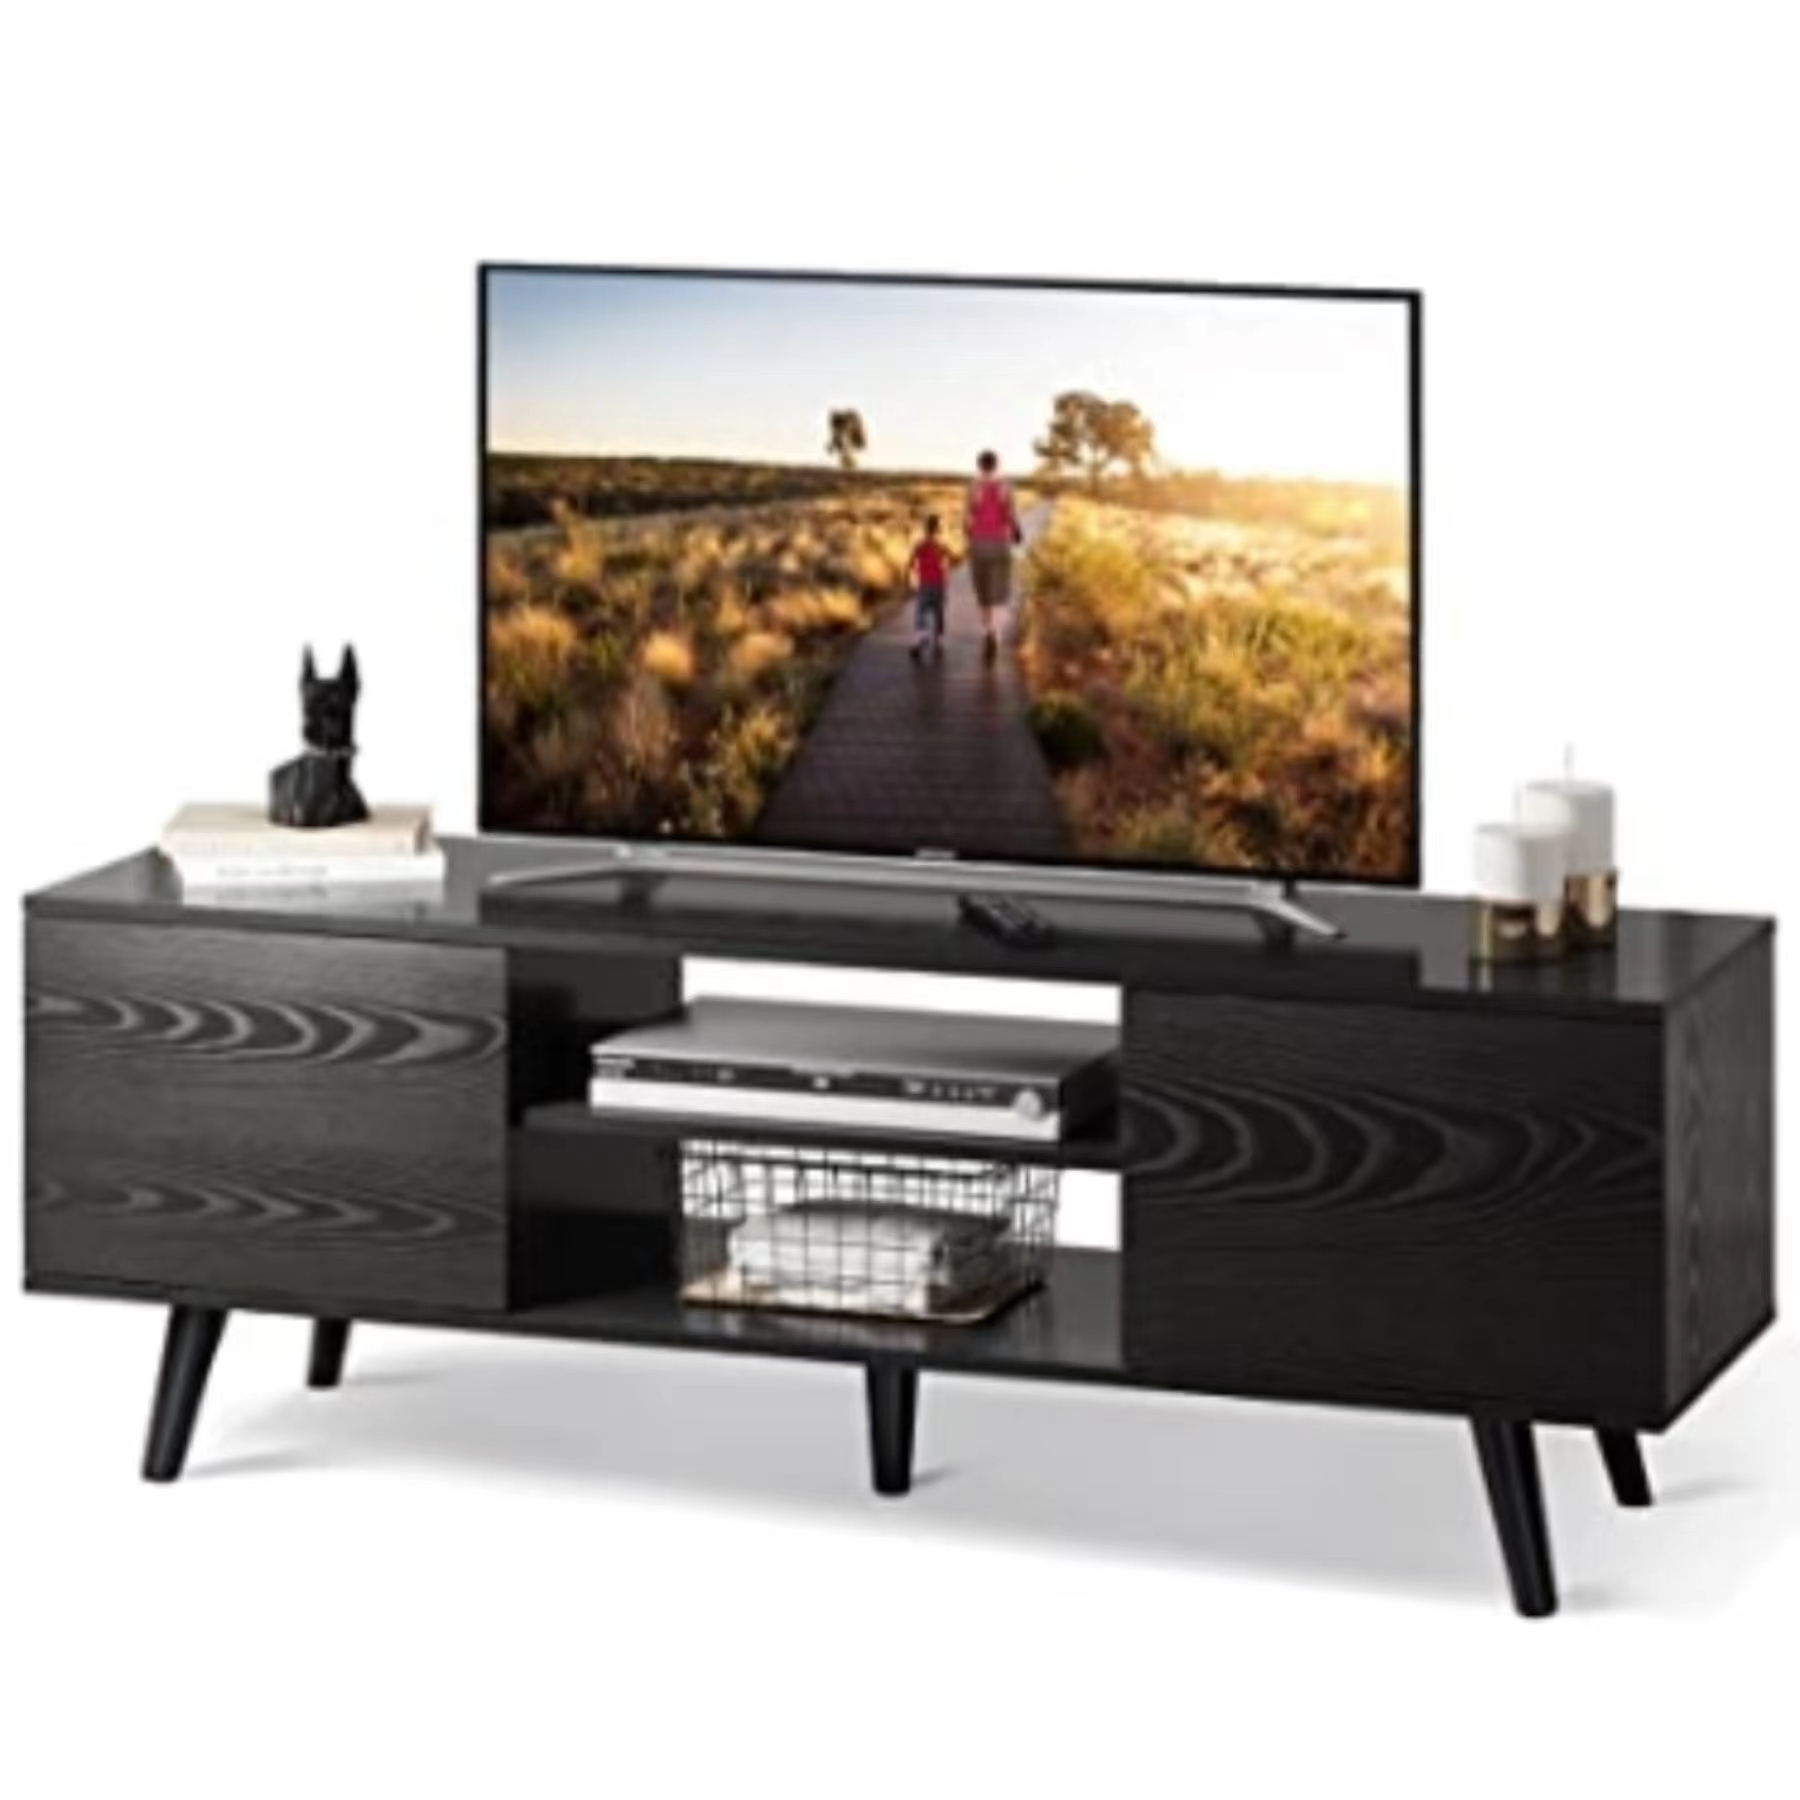 Particleboard TV Cabinet With Adjustable Three Shelves Living Room Furniture